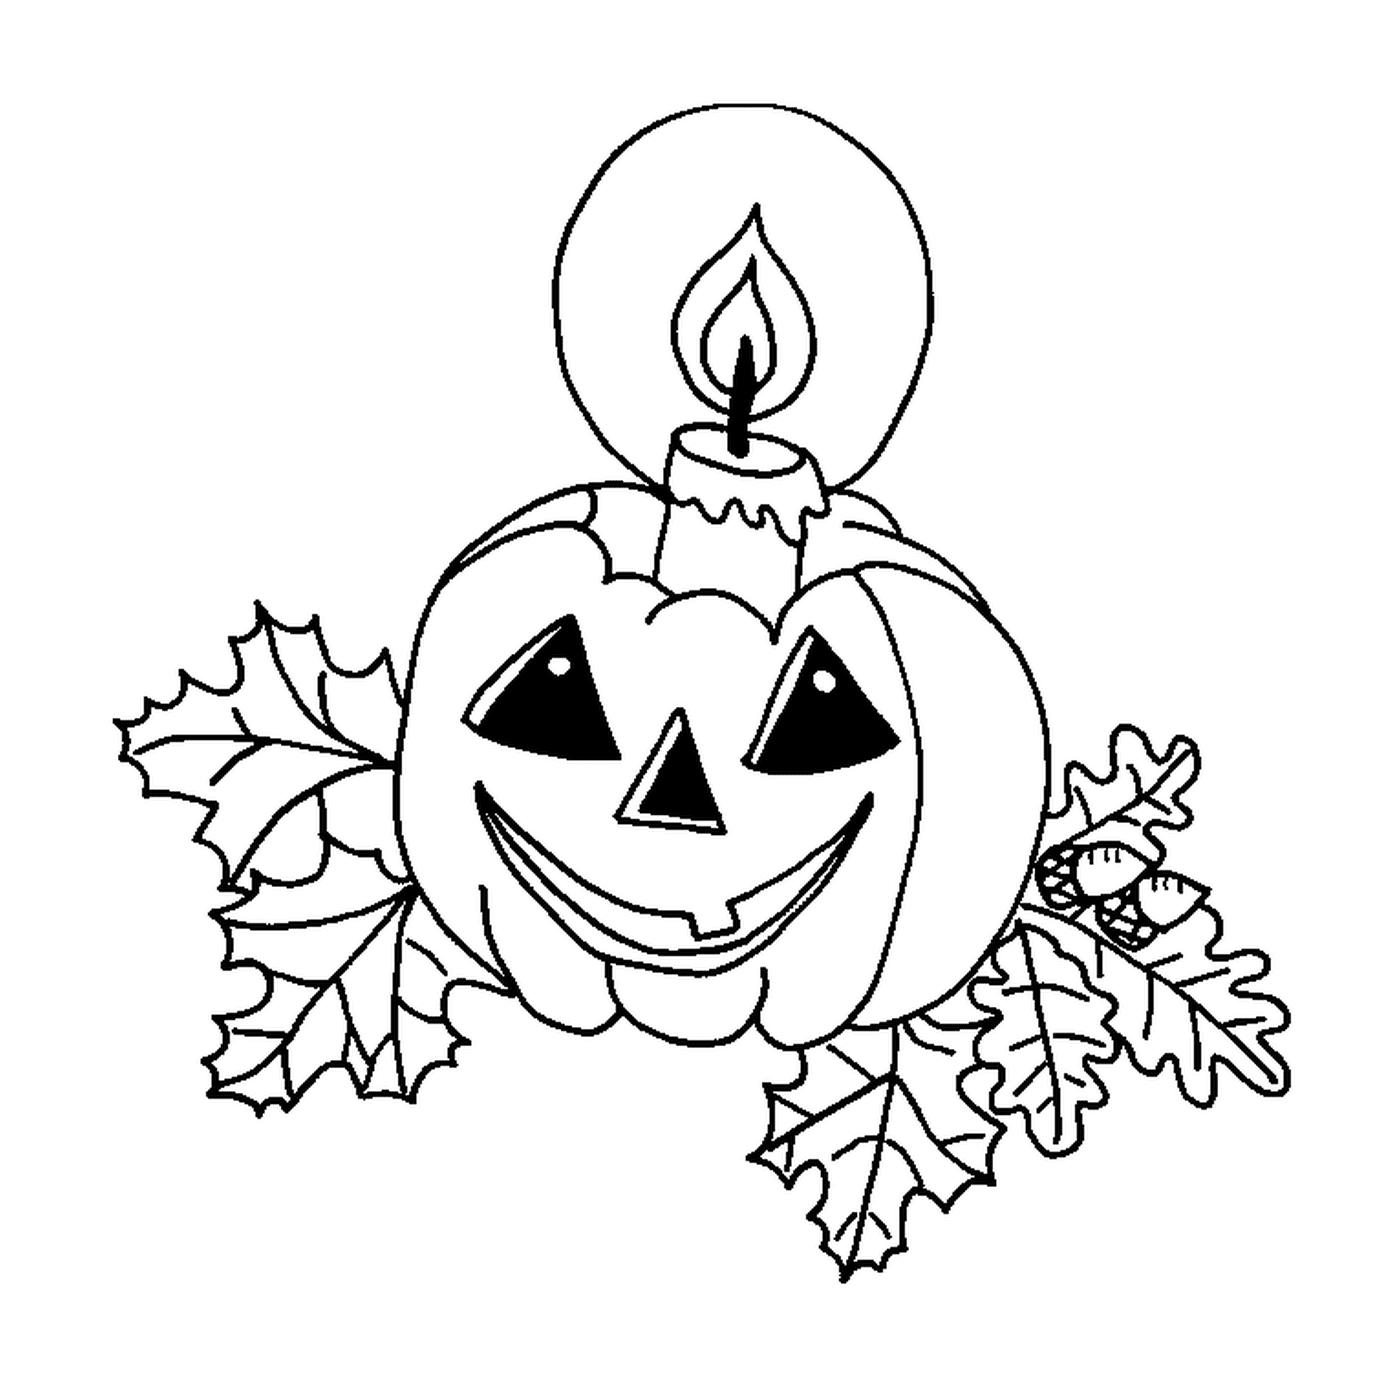  Pumpkin with an extinguished candle 